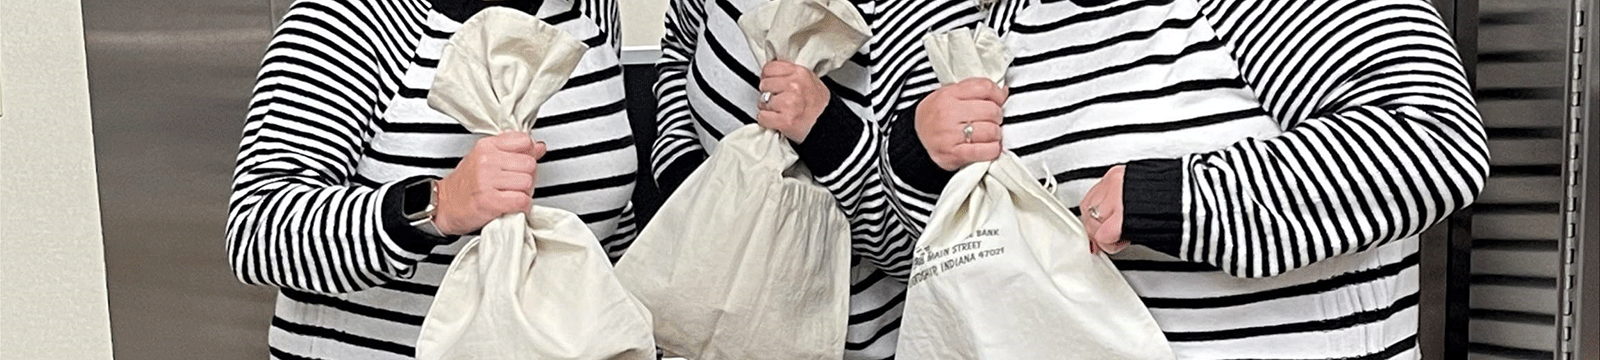 Close up of three individuals wearing black and white striped shirts and holding money bags.